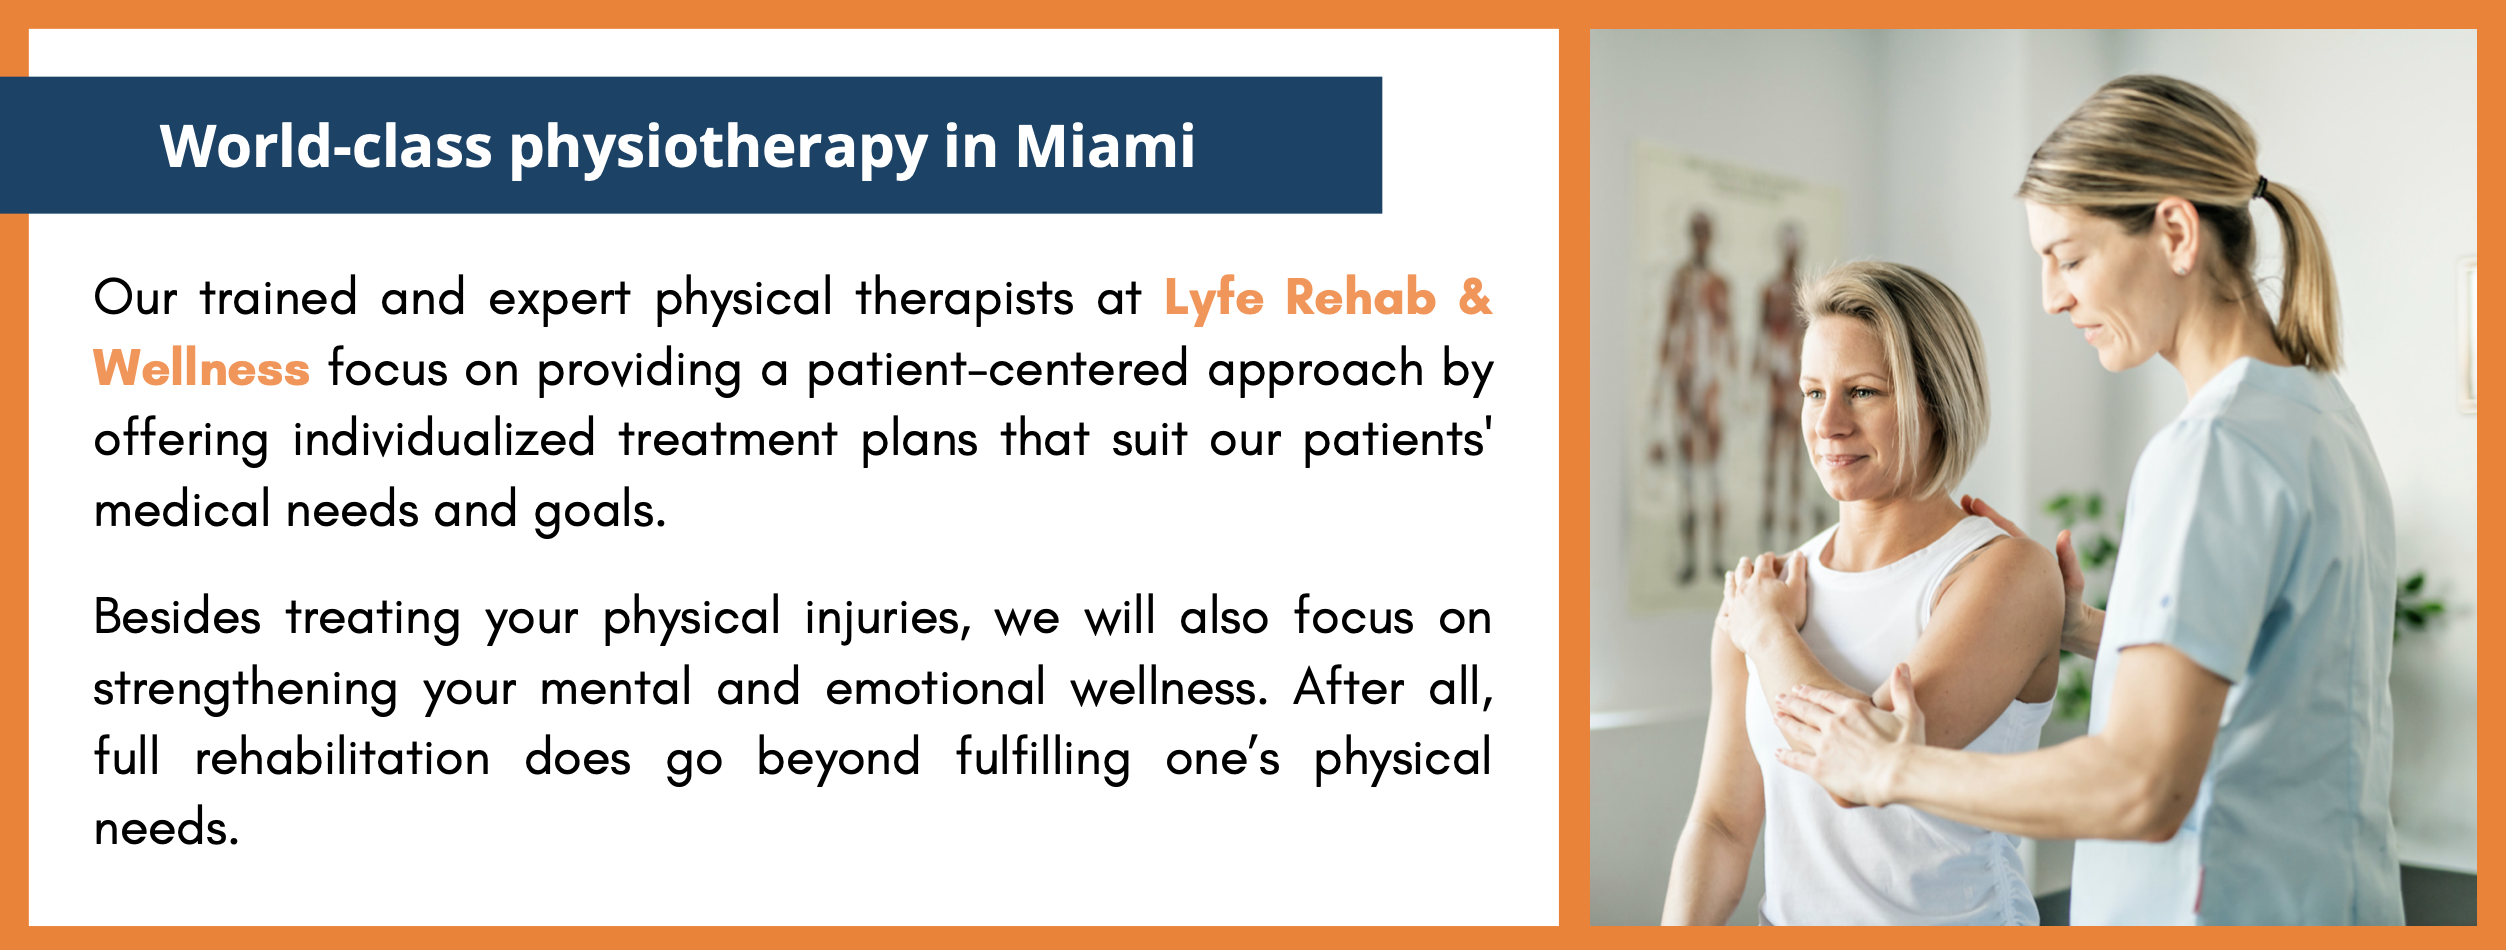 World-class physiotherapy in Miami